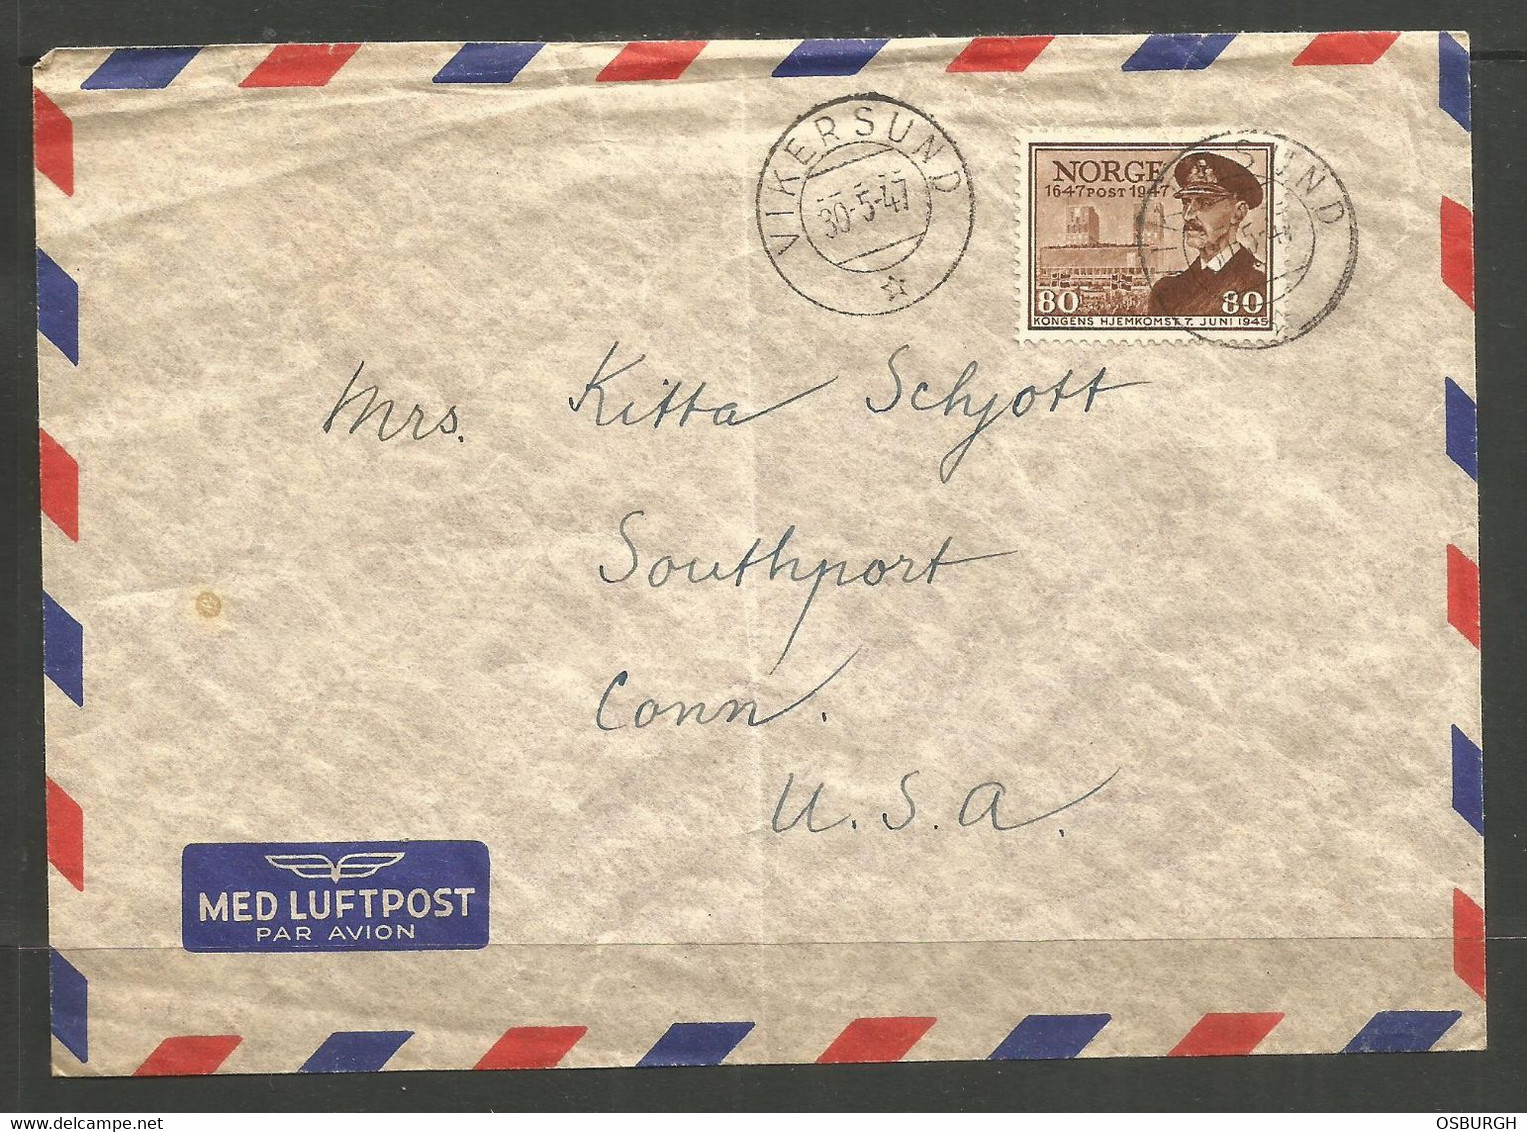 NORWAY. 1947. AIR MAIL COVER. VIKERSUND TO SOUTHPORT CONNECTICUT - Lettres & Documents